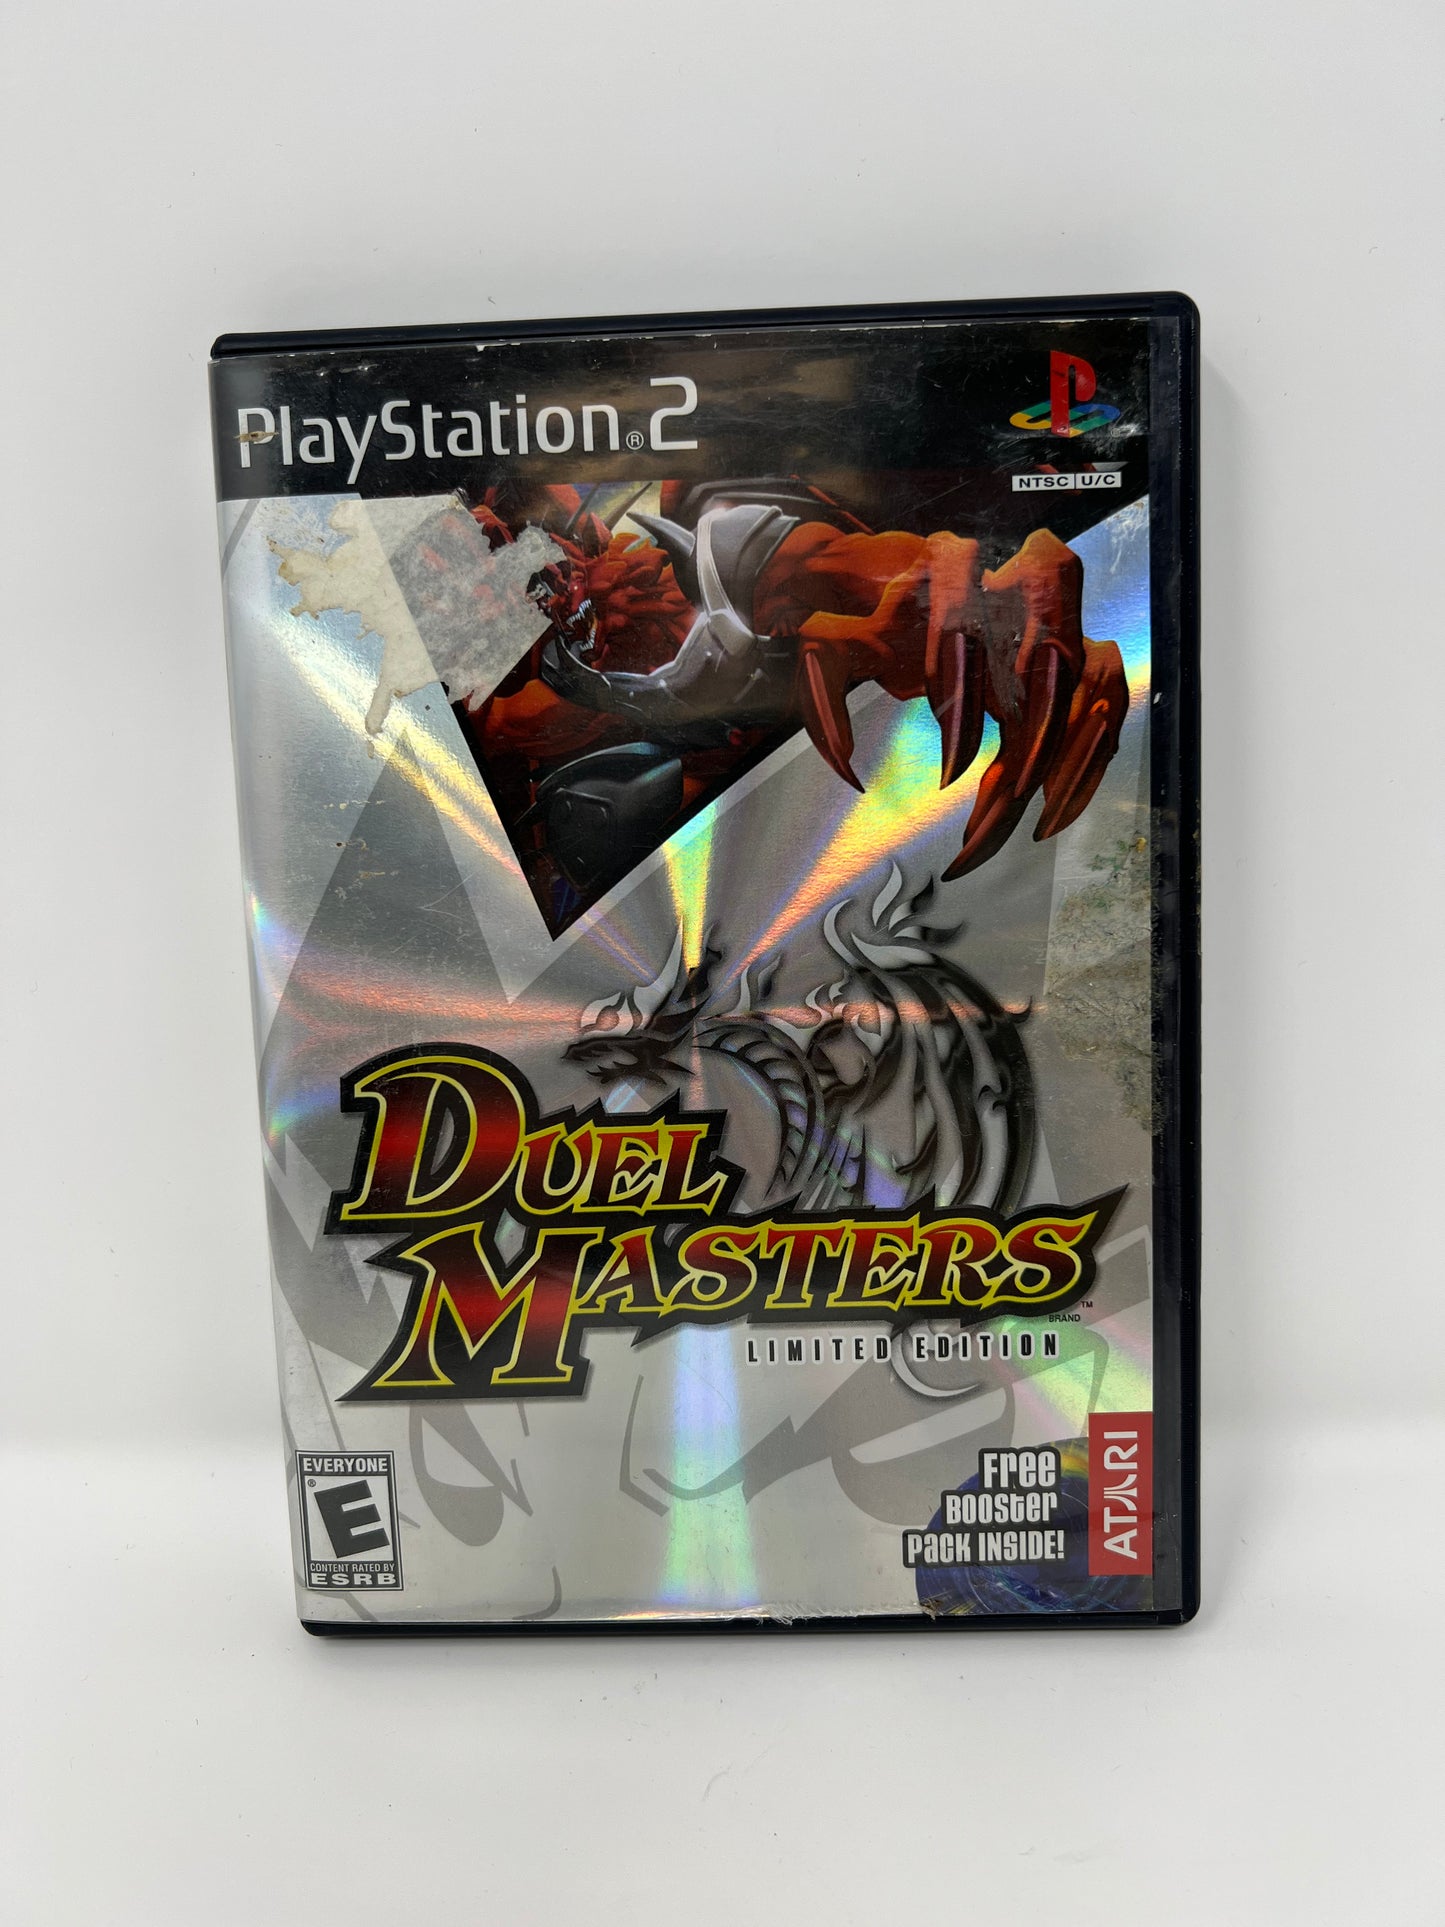 Duel Masters Limited Edition - PS2 Game - Used